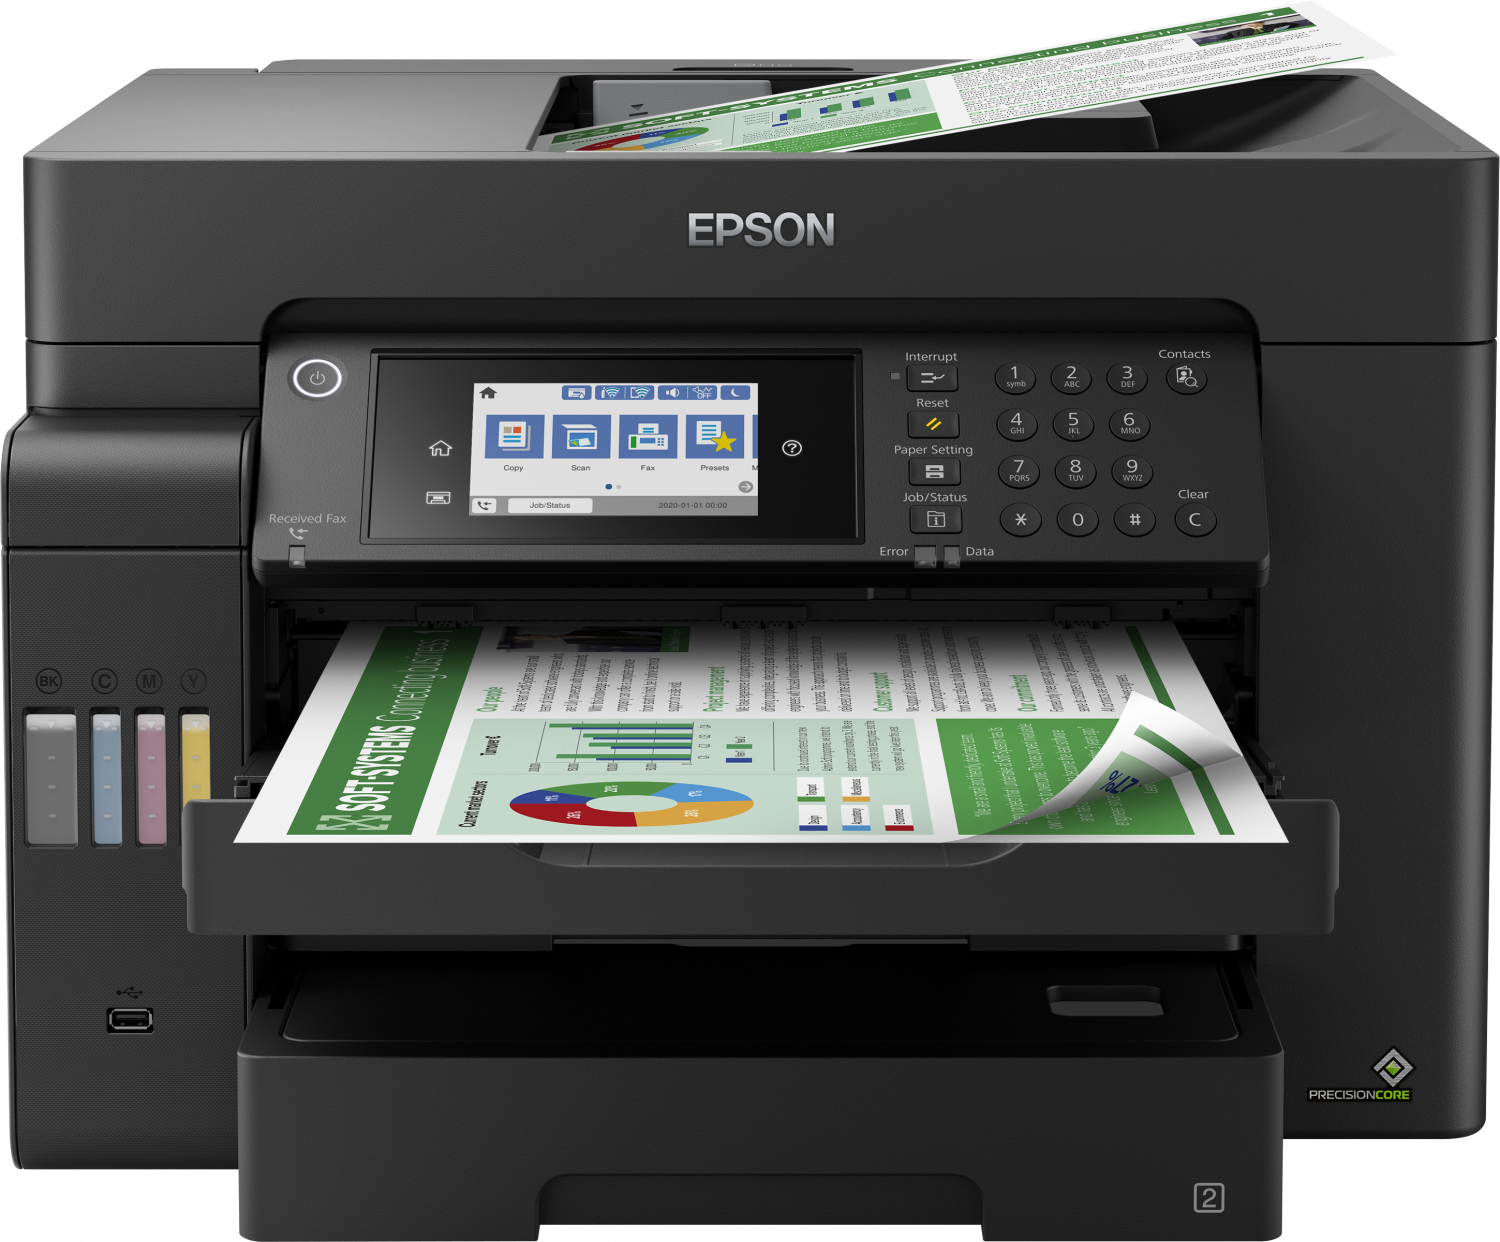 Step-by-step Driver Epson L15150/L15160 Ubuntu 18.04 Installation - Featured